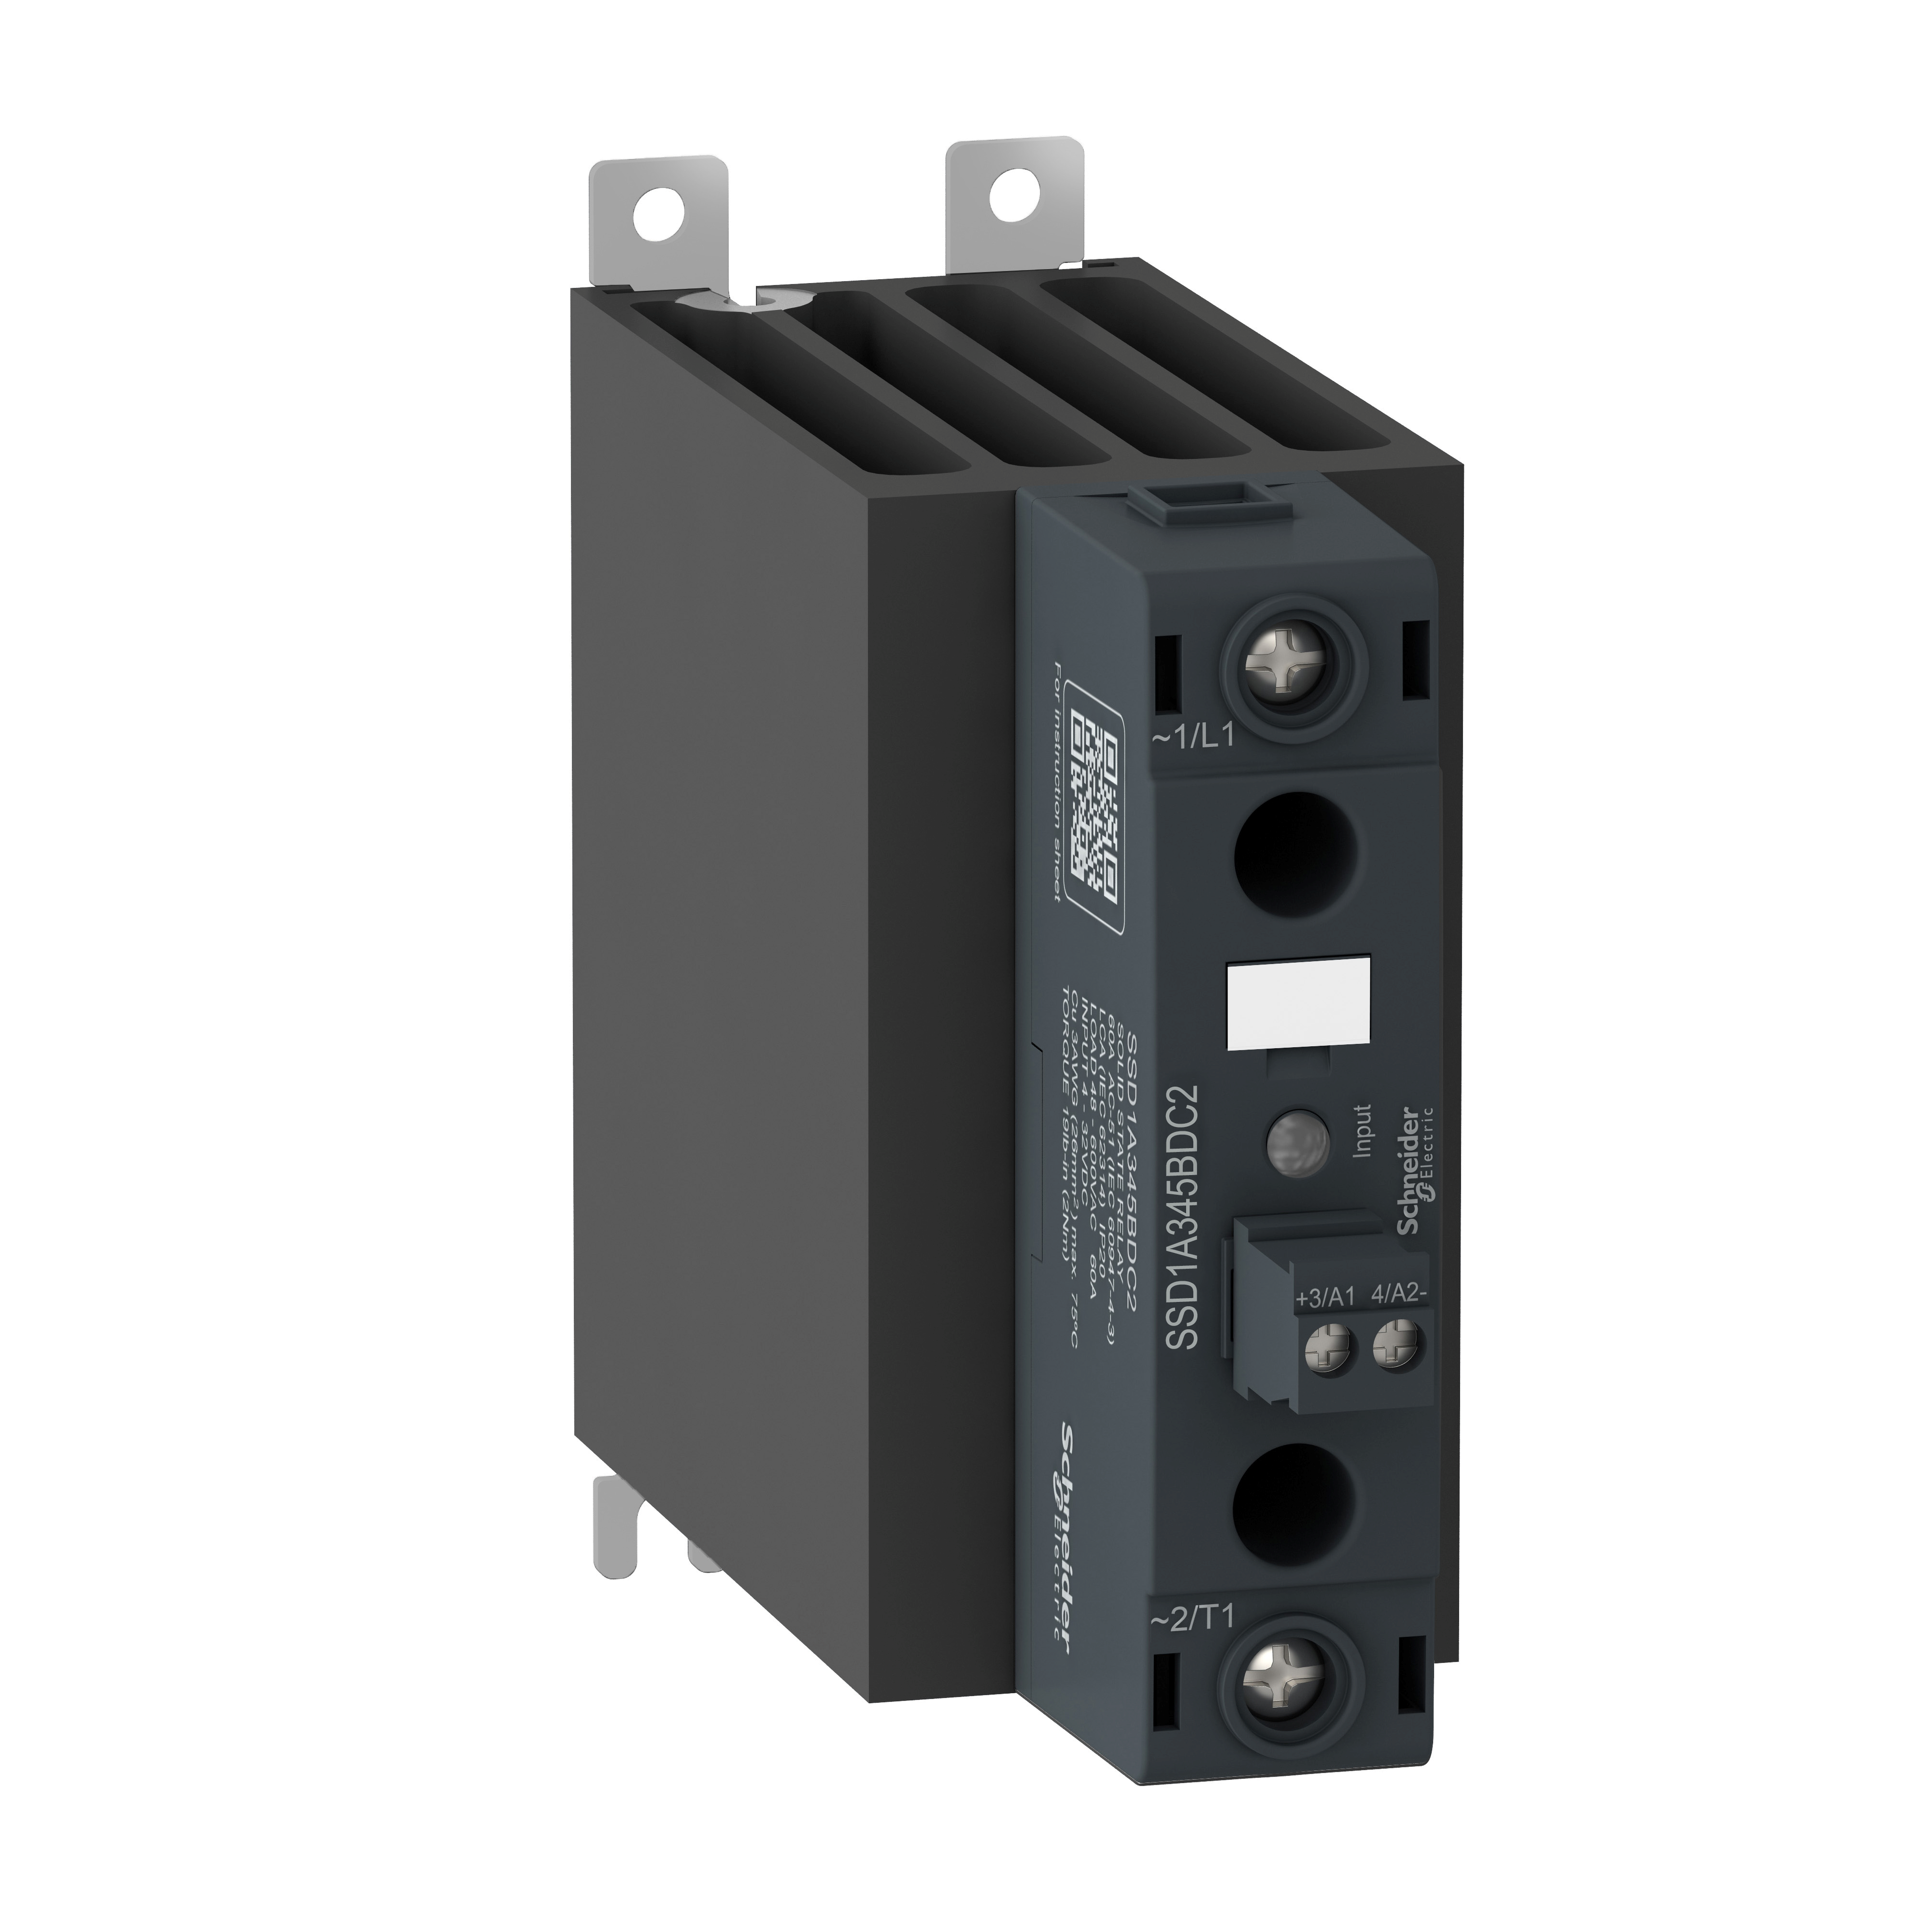 DIN rail mount, Harmony Solid State Relays, 60A, zero Voltage switching, contactor configuration screw input, input 4 to 32V DC, output 48 to 600V AC